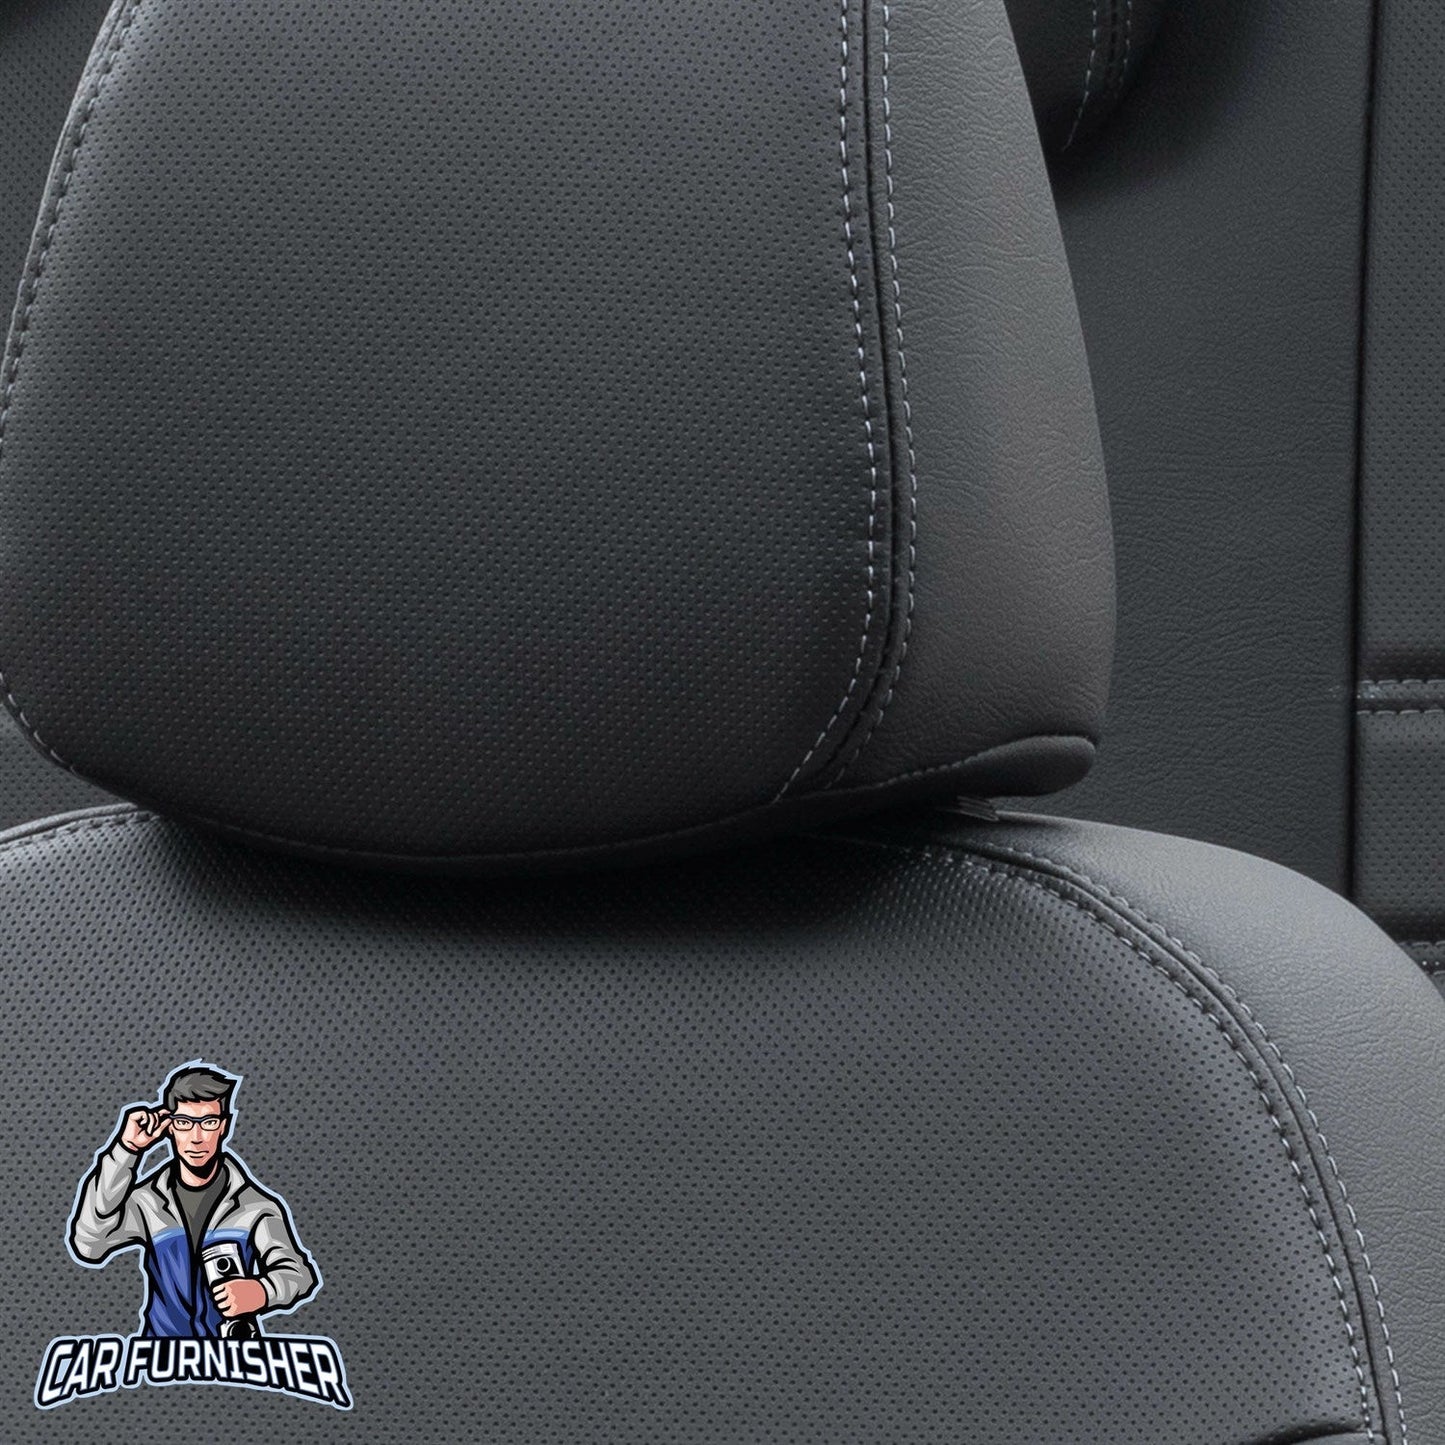 Ssangyong Kyron Seat Covers Istanbul Leather Design Black Leather